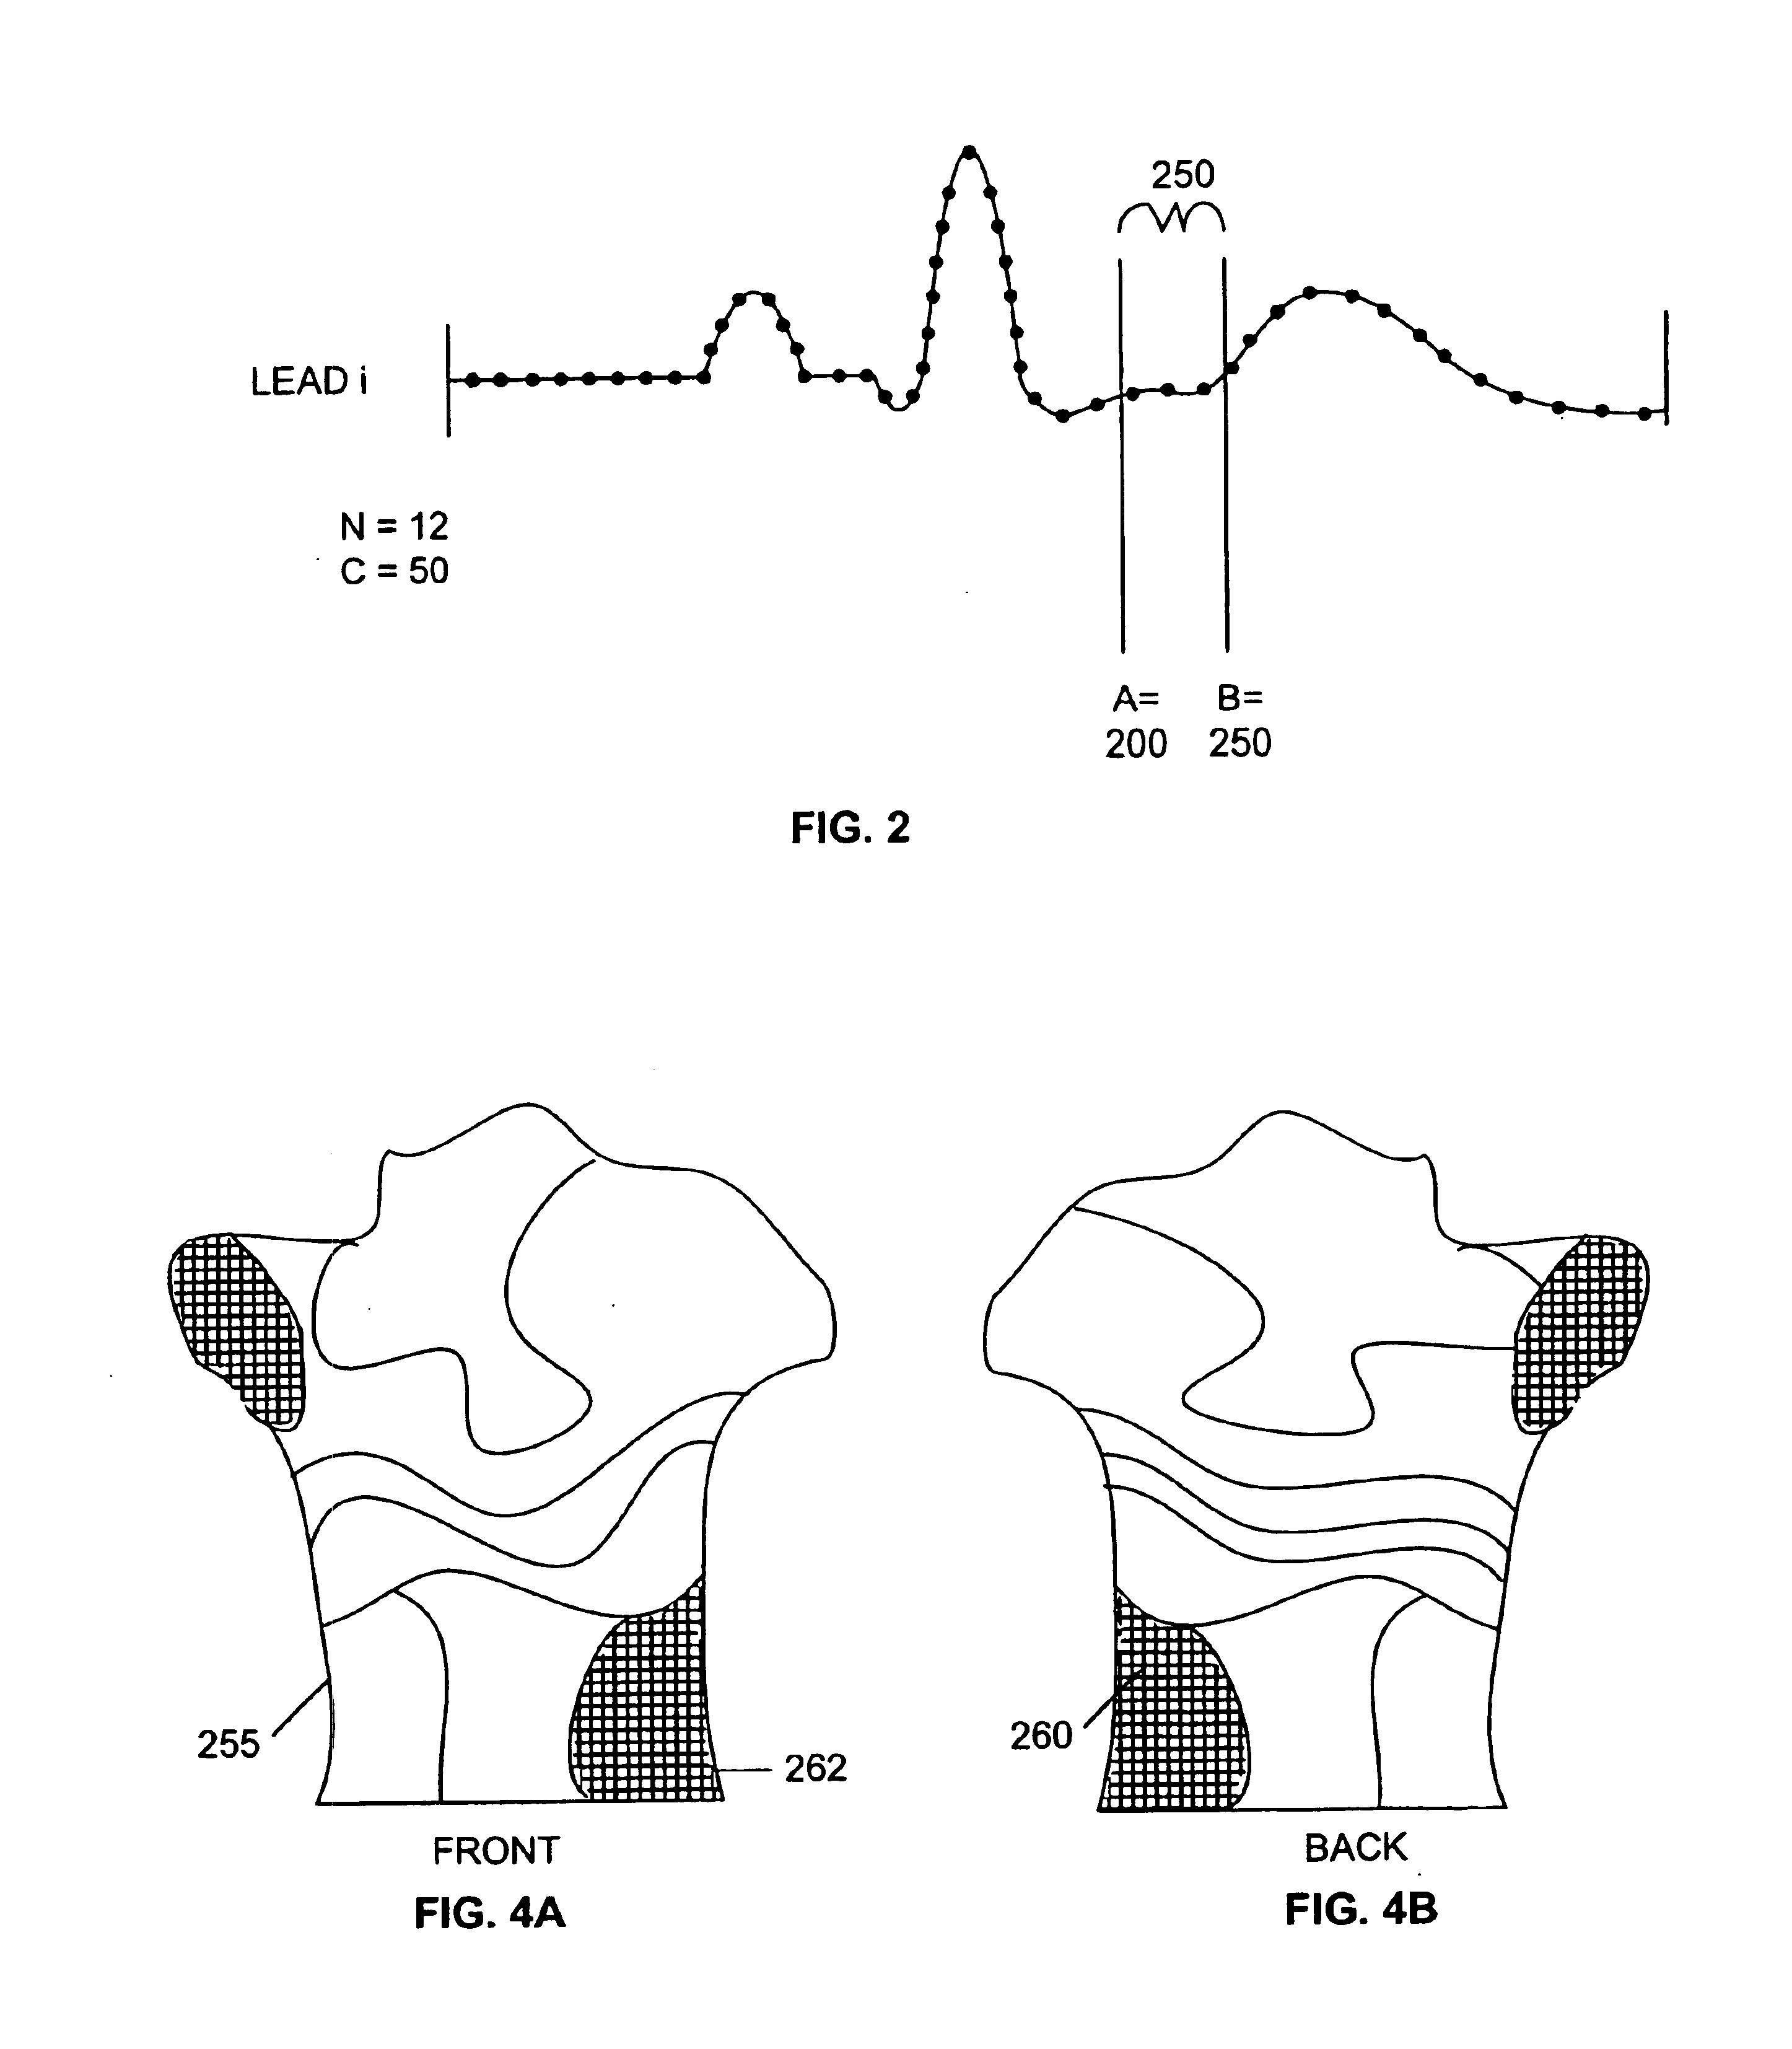 Method of and apparatus for displaying and analyzing a physiological signal